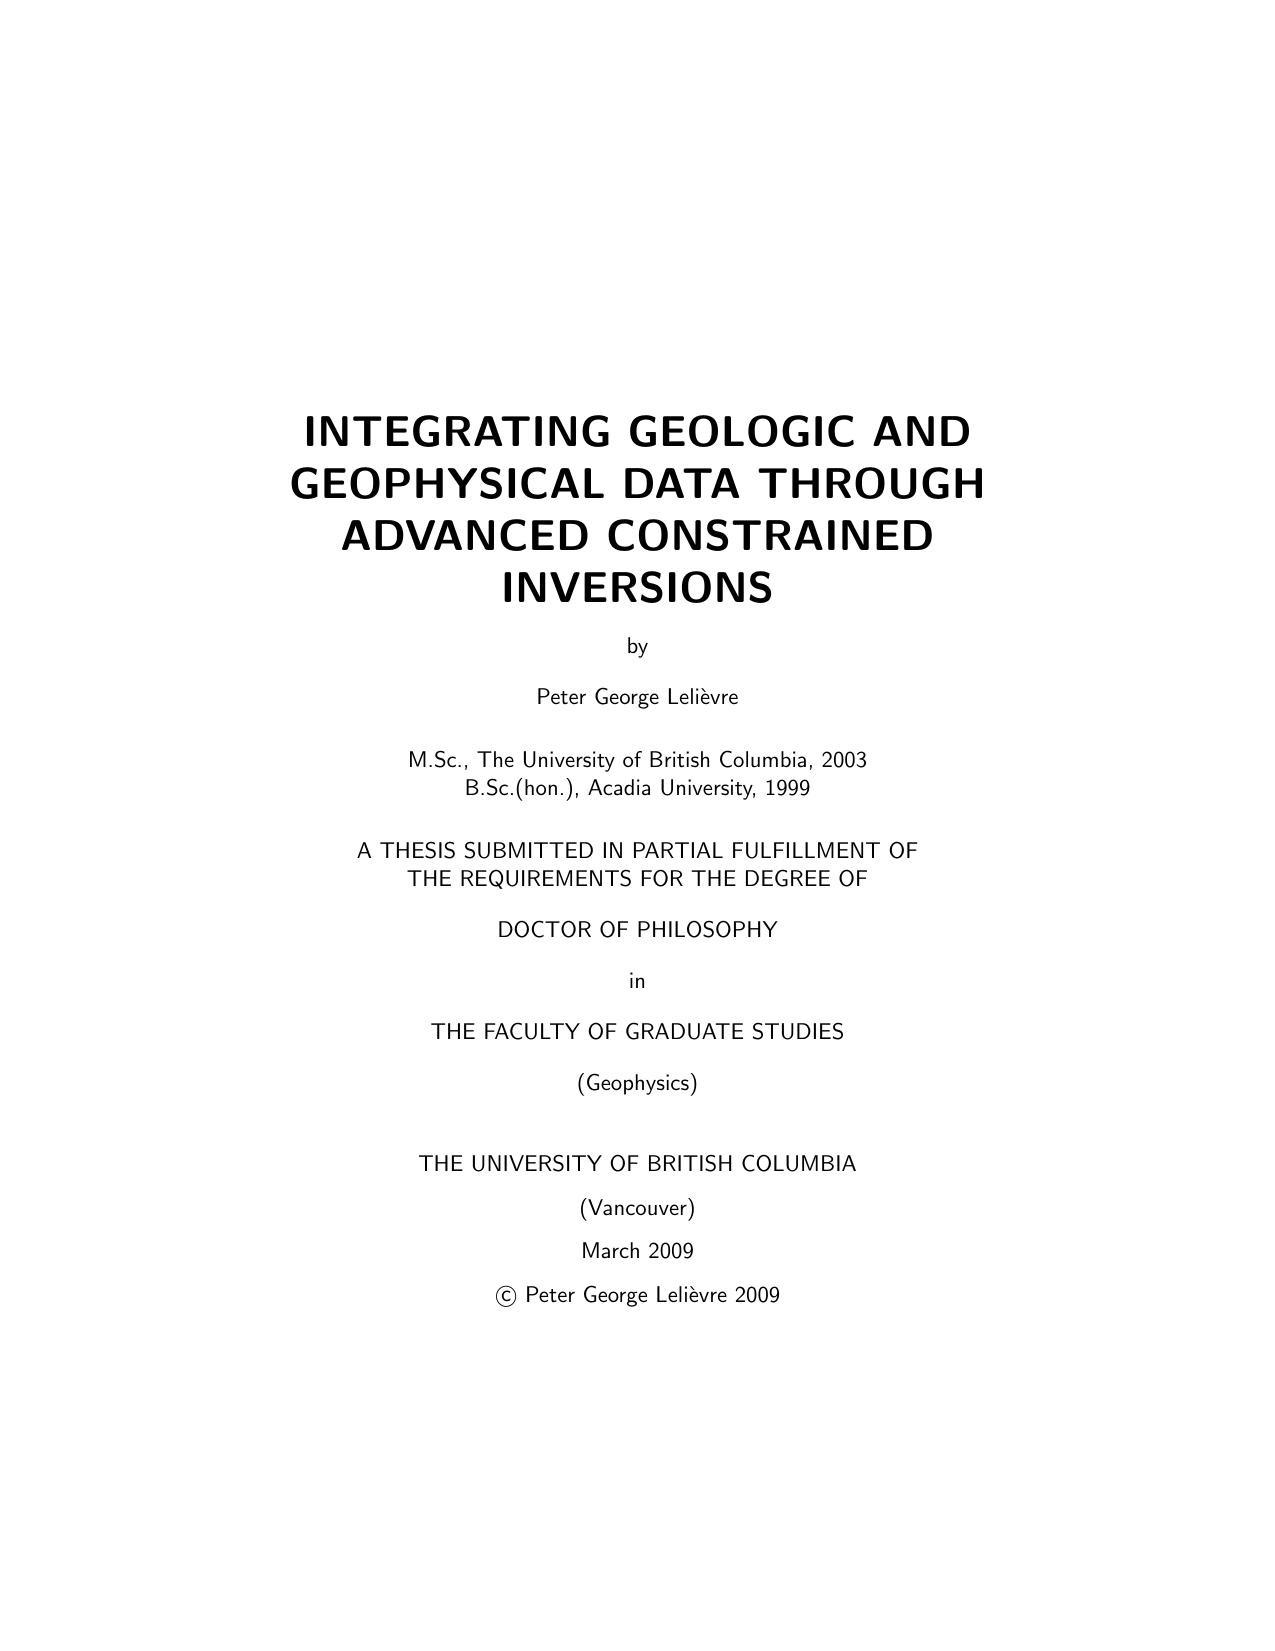 INTEGRATING GEOLOGIC AND GEOPHYSICAL DATA 2009